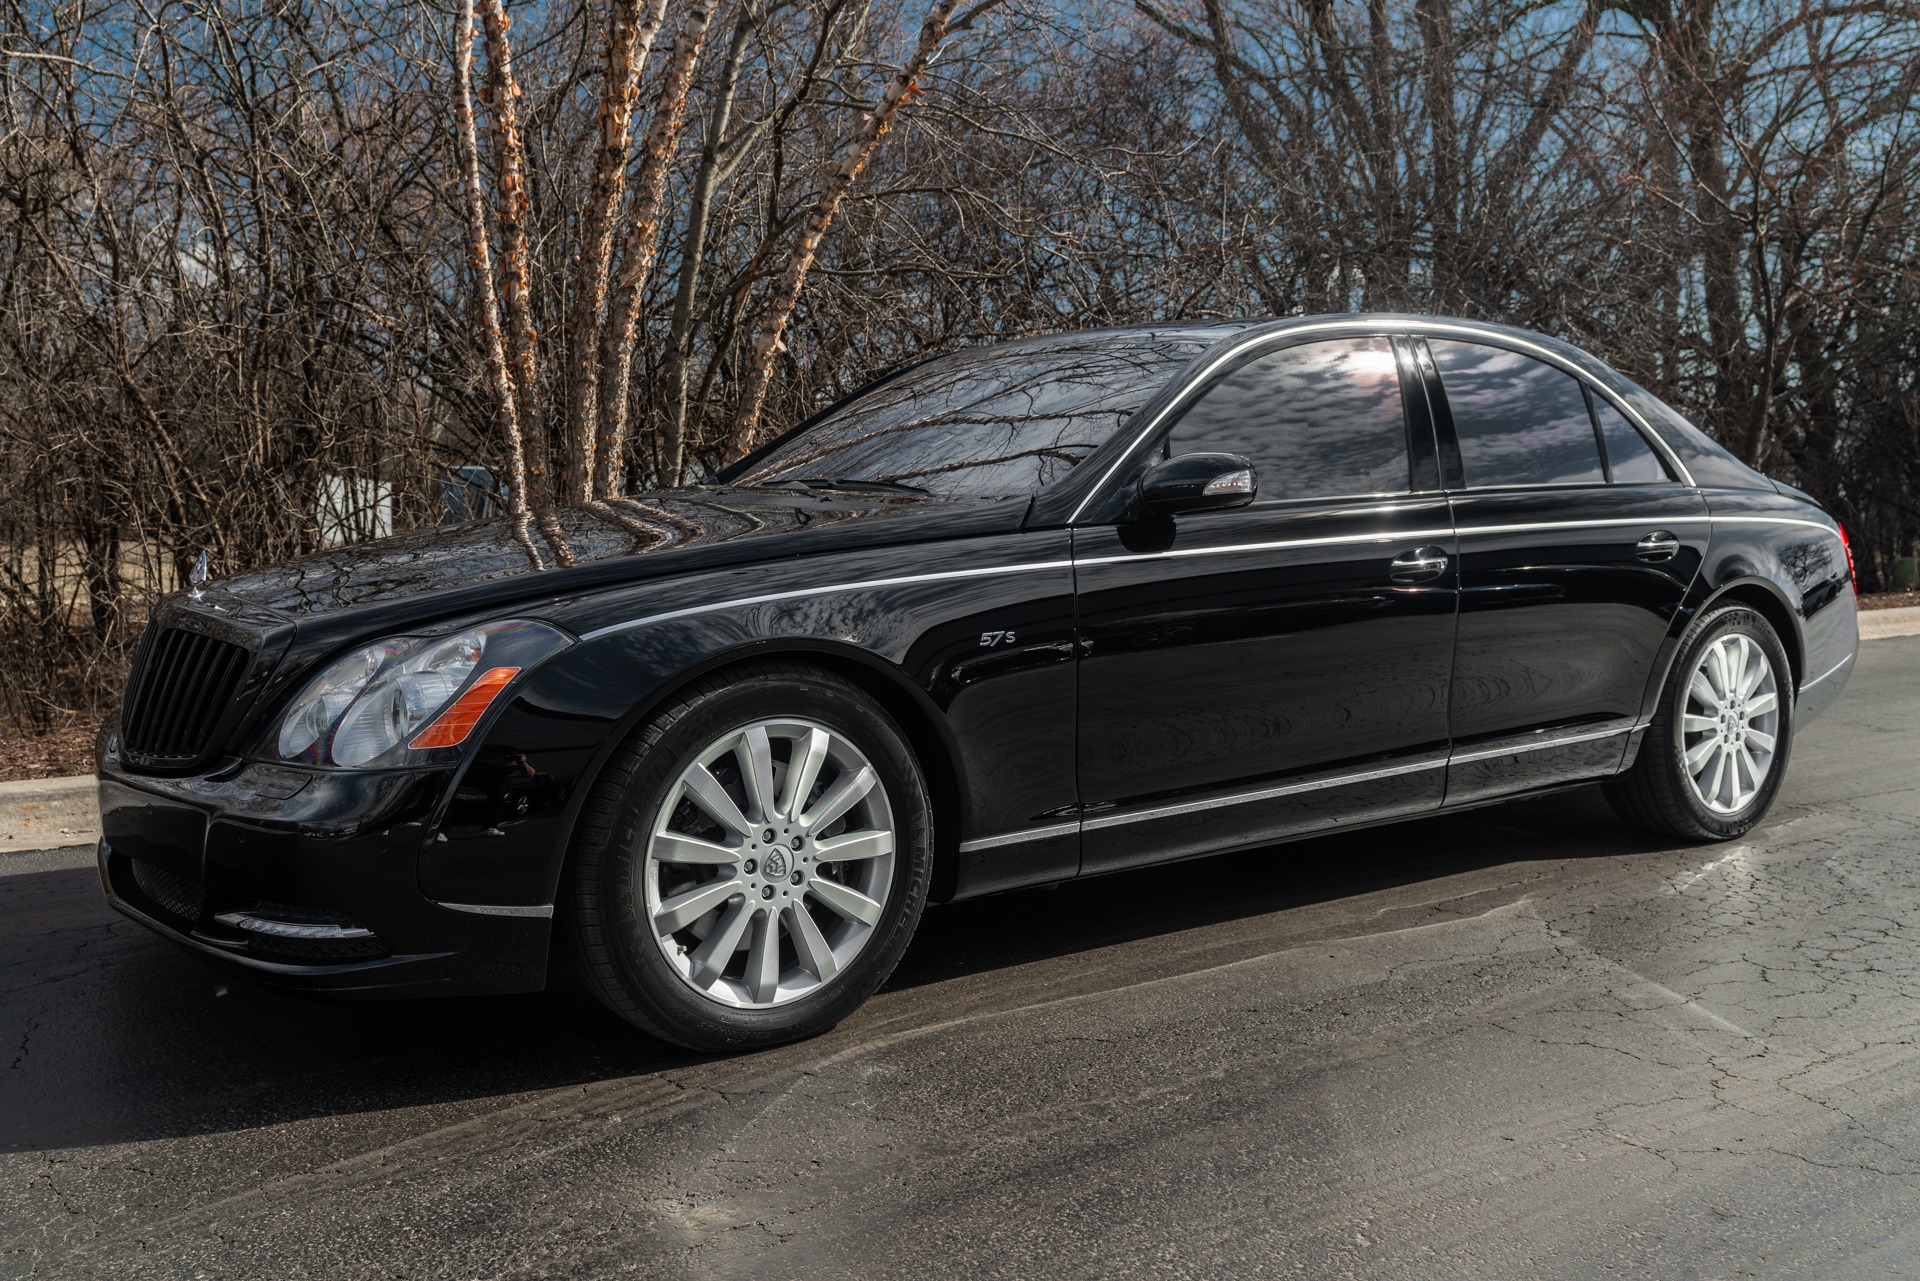 Used-2009-Maybach-57-S-Only-23k-Miles-Just-Serviced-Celebrity-Owned-Updated-2012-Front-End